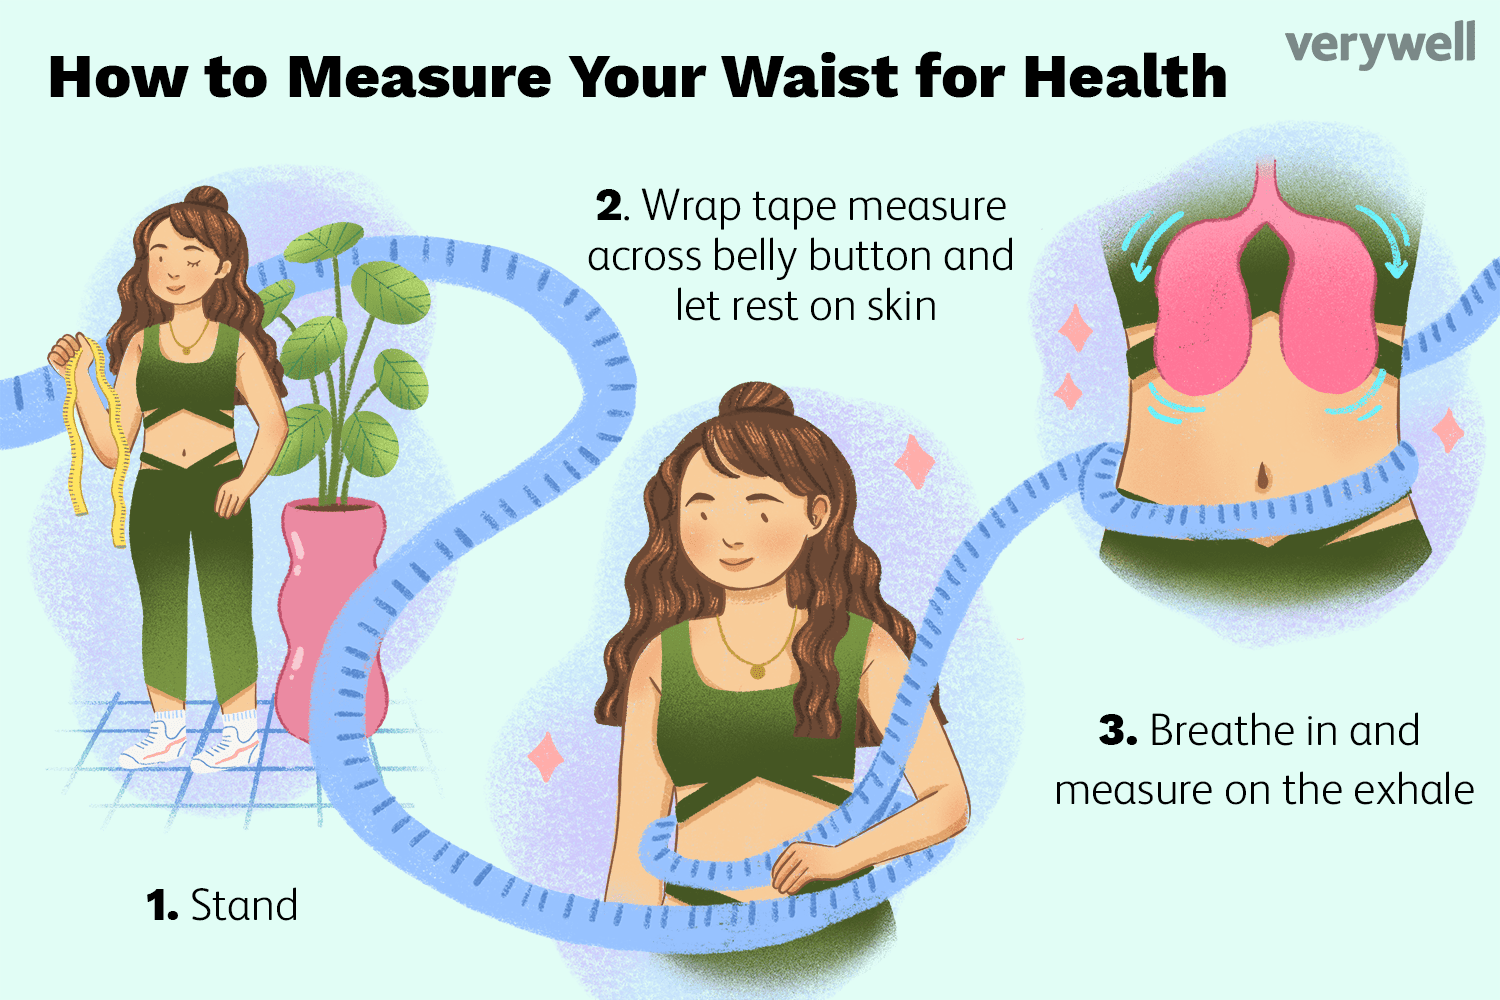 How to measure your waist for health